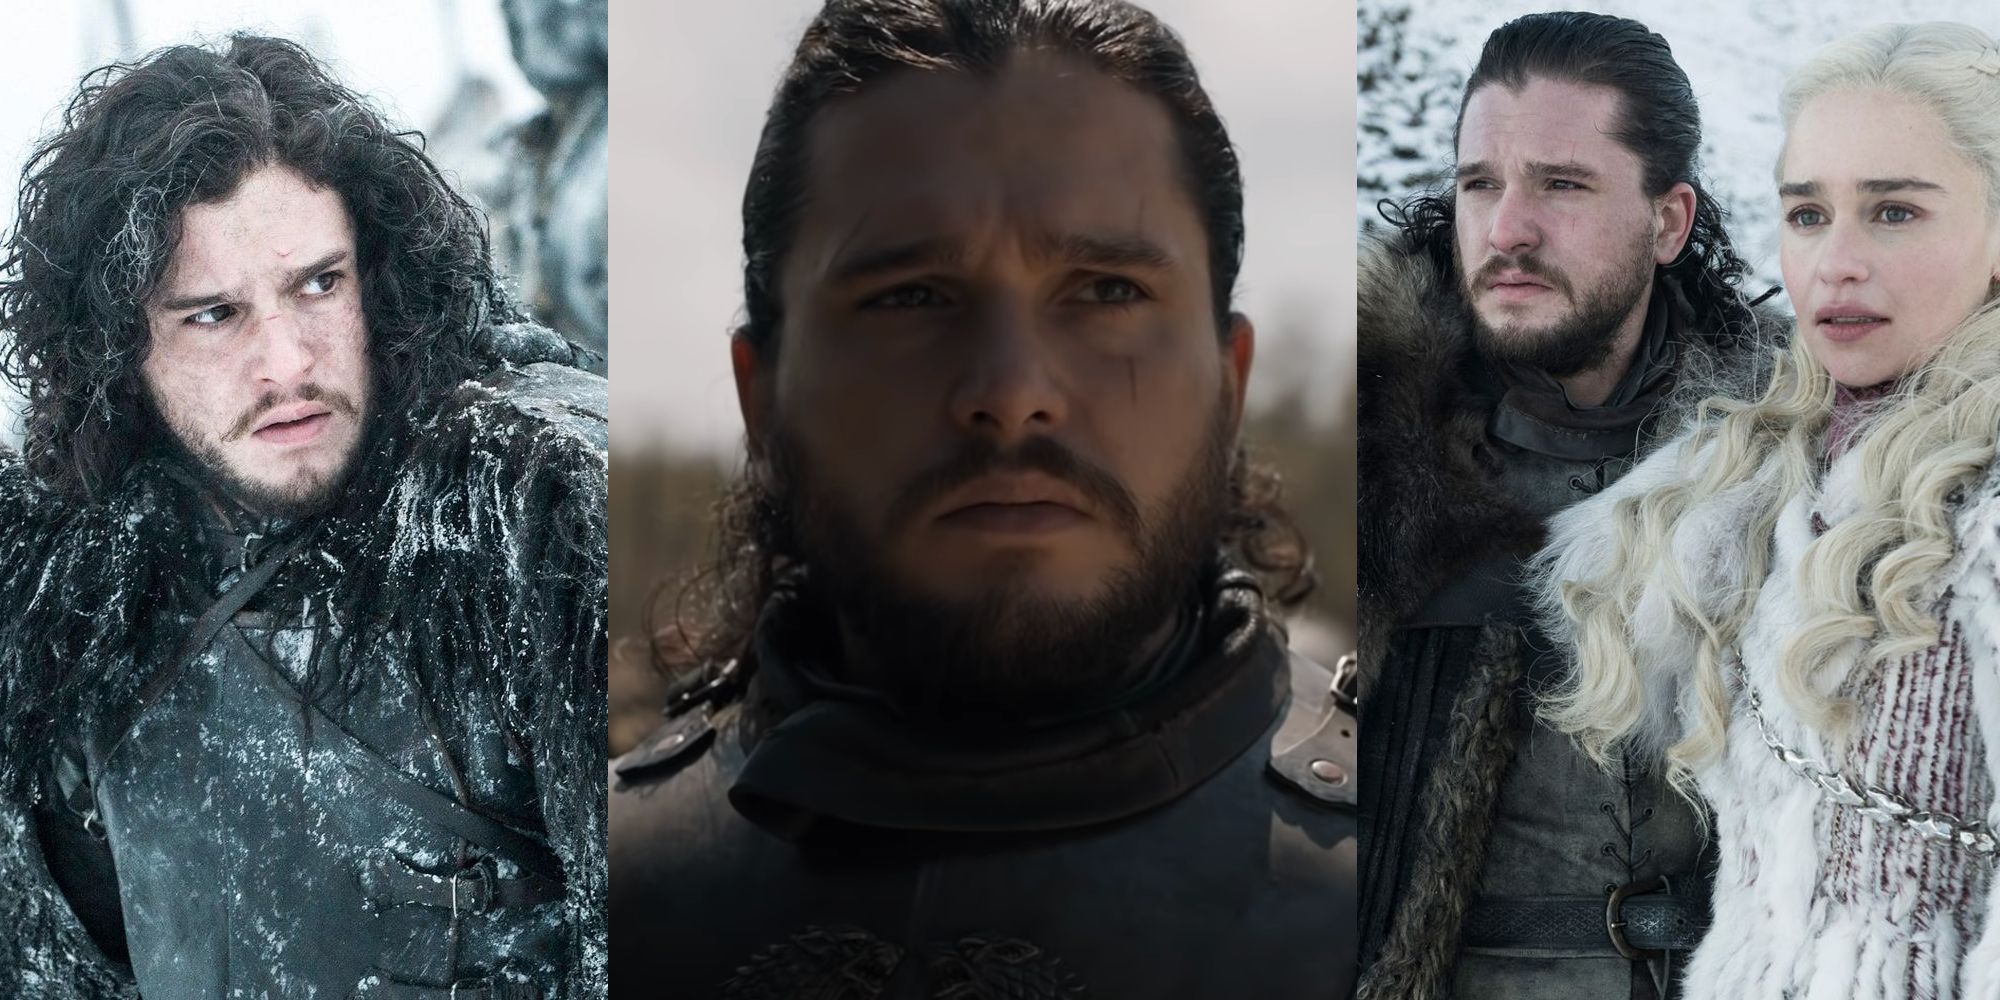 Jon Snow in his Night's Watch outfit; Jon Snow at the gates of King's Landing; Jon standing with Daenerys in season 8